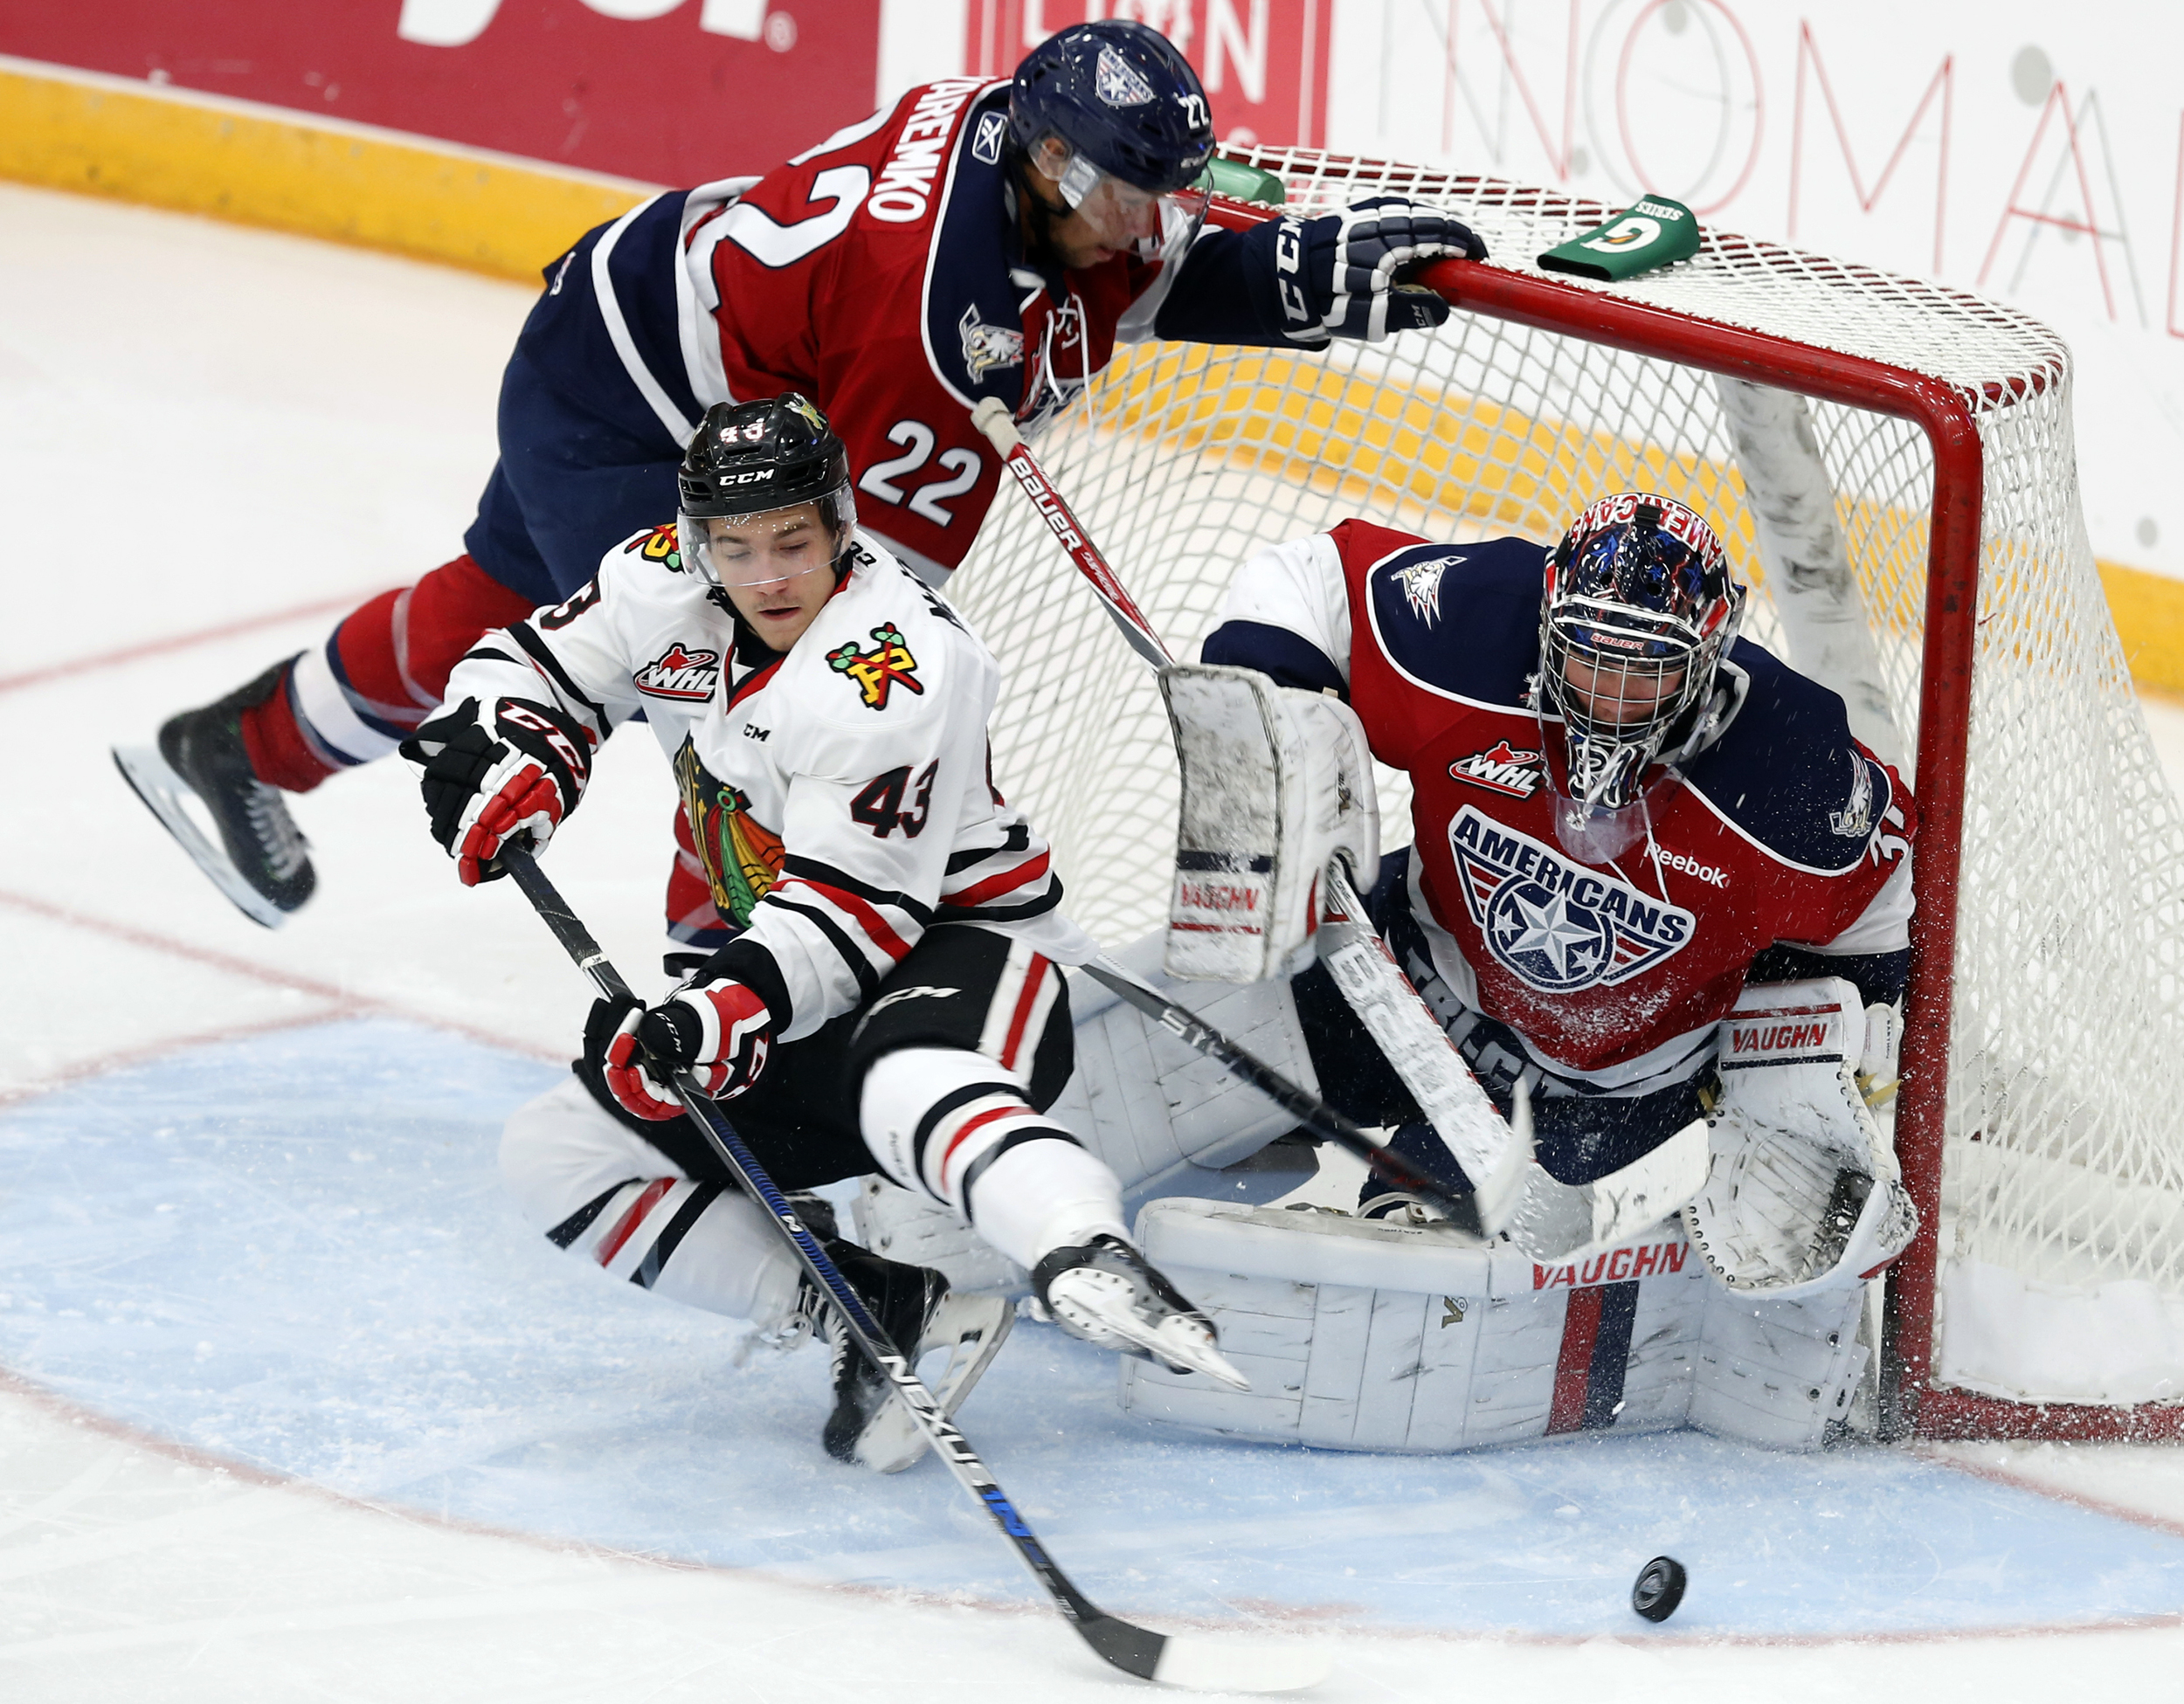  Tri City Americans' Ervan Sarthou (31) and Nolan Yaremko (22) block a goal attempt from Portland Winterhawks' Skyler McKenzie (43) October 24, 2015 during a game at the Toyota Center in Kennewick. (Tri-City Herald)  